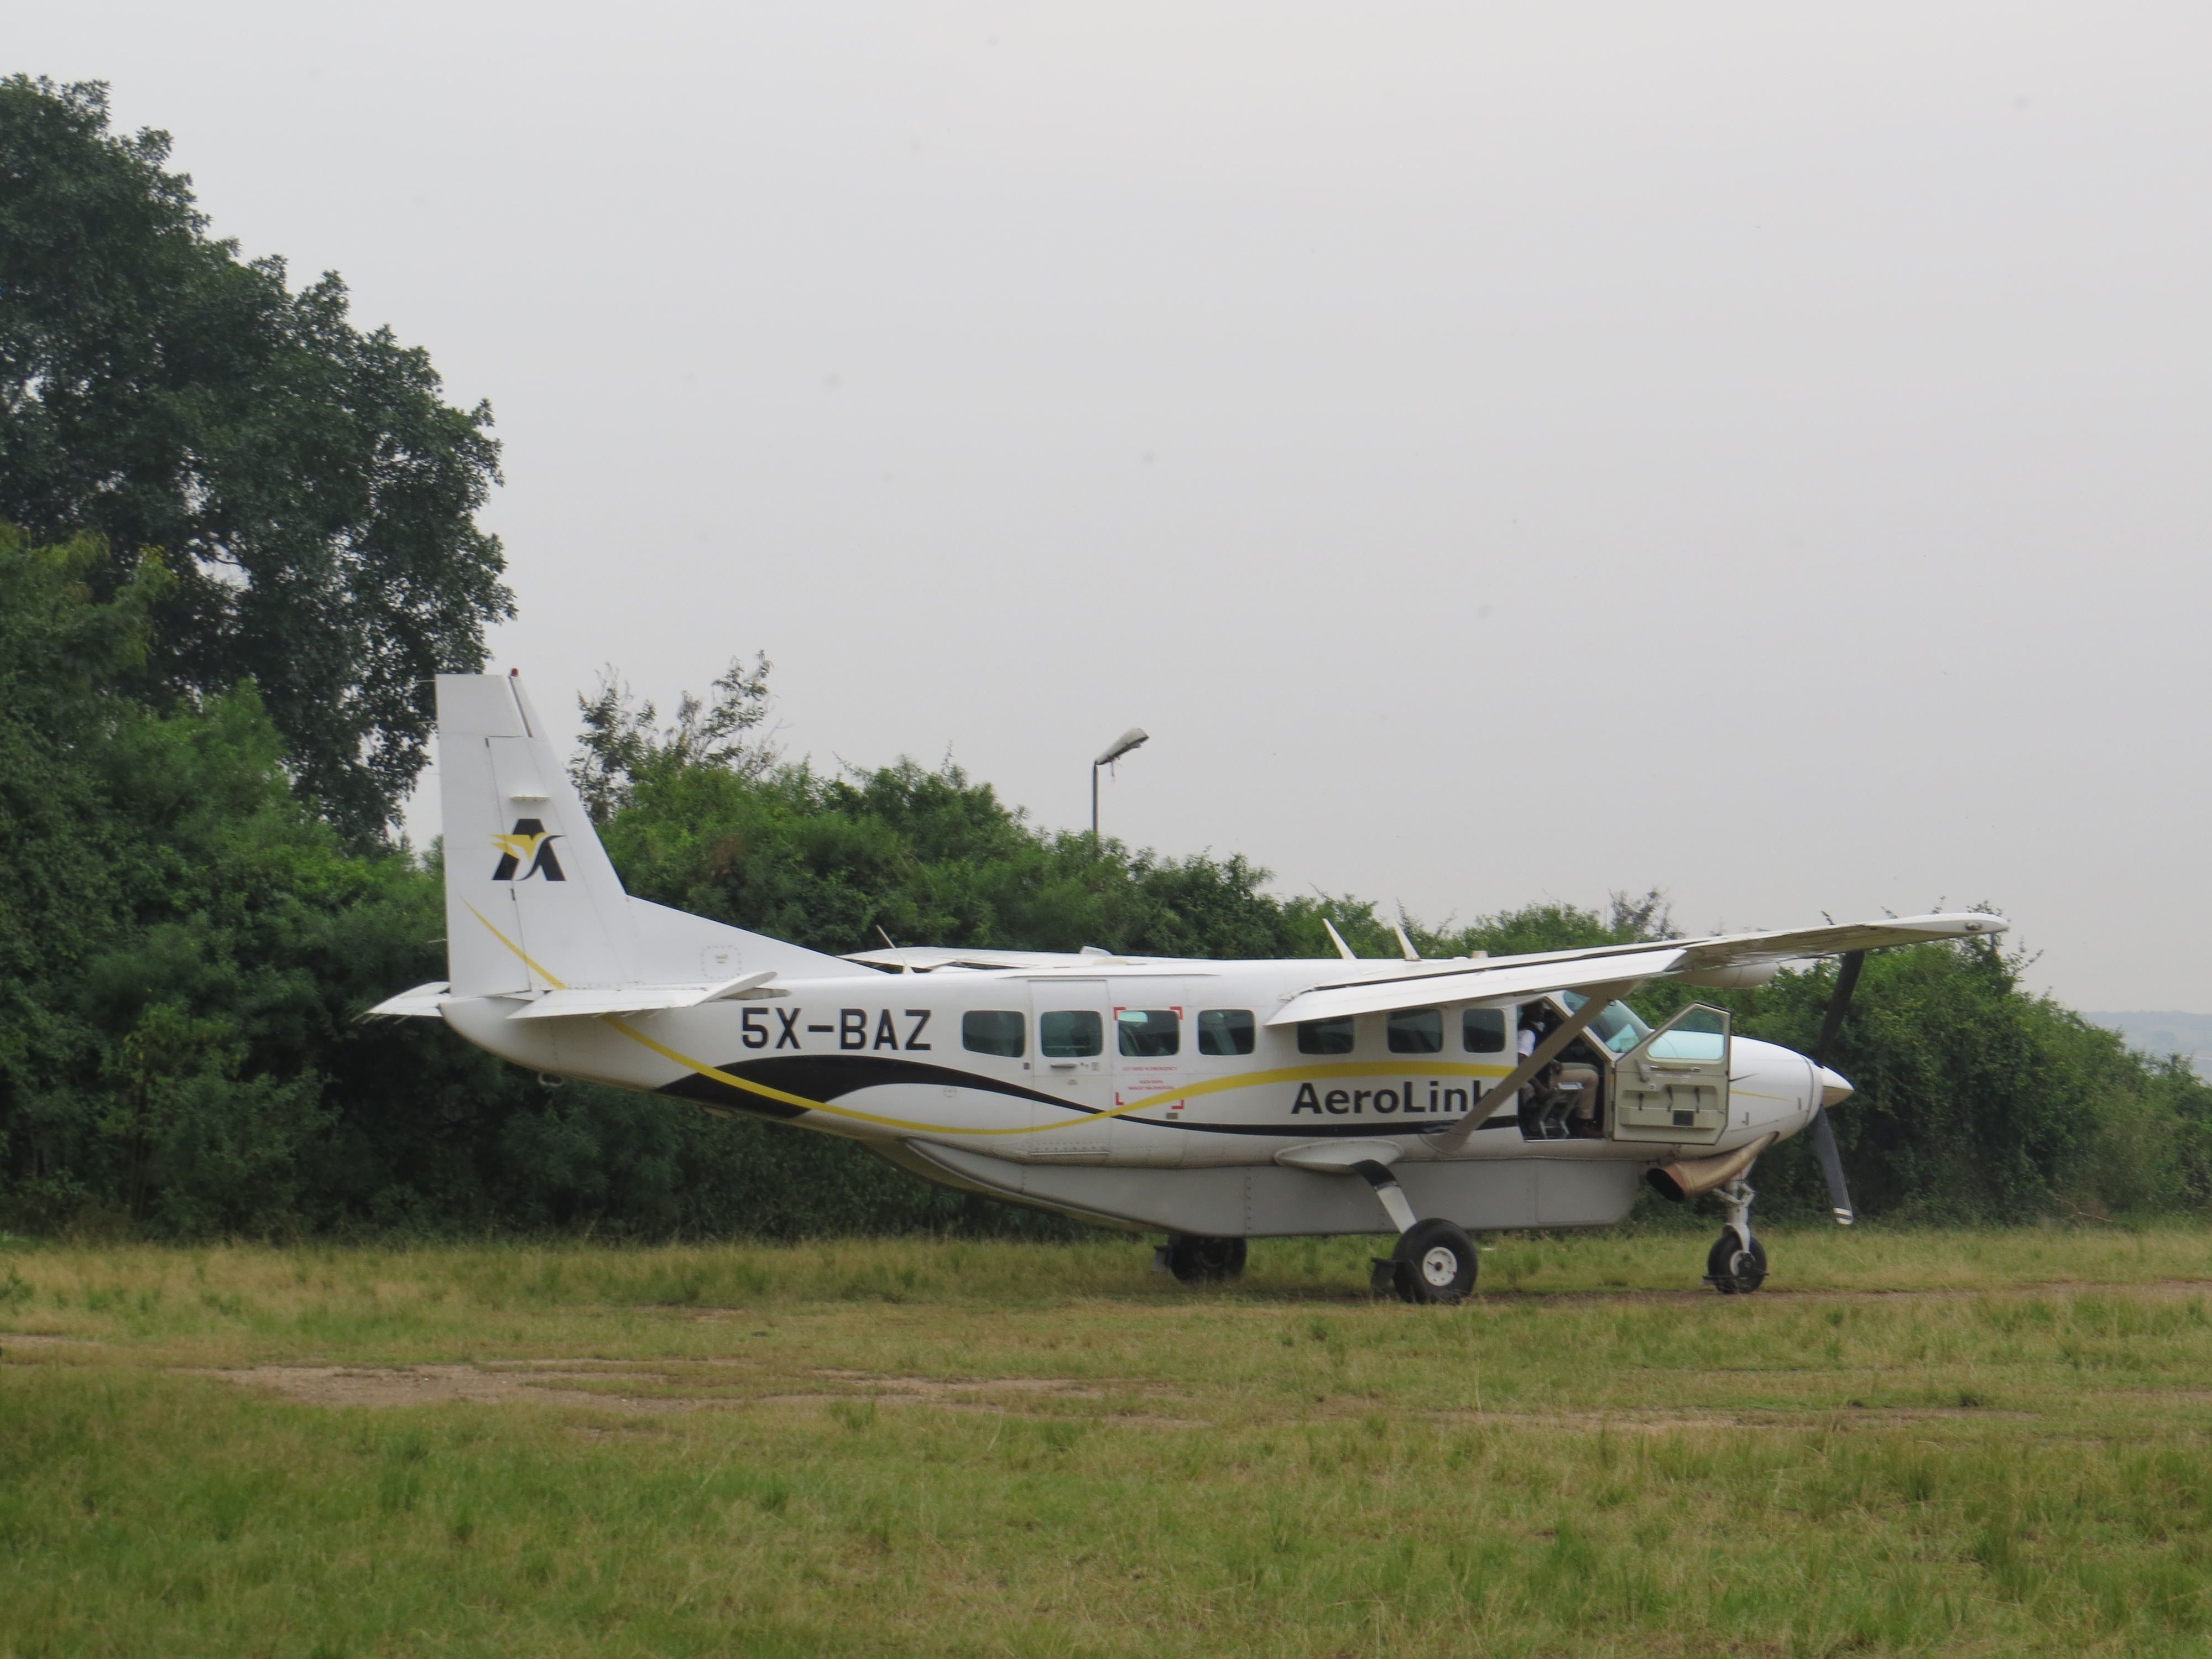 Flights to Kidepo Valley National Park